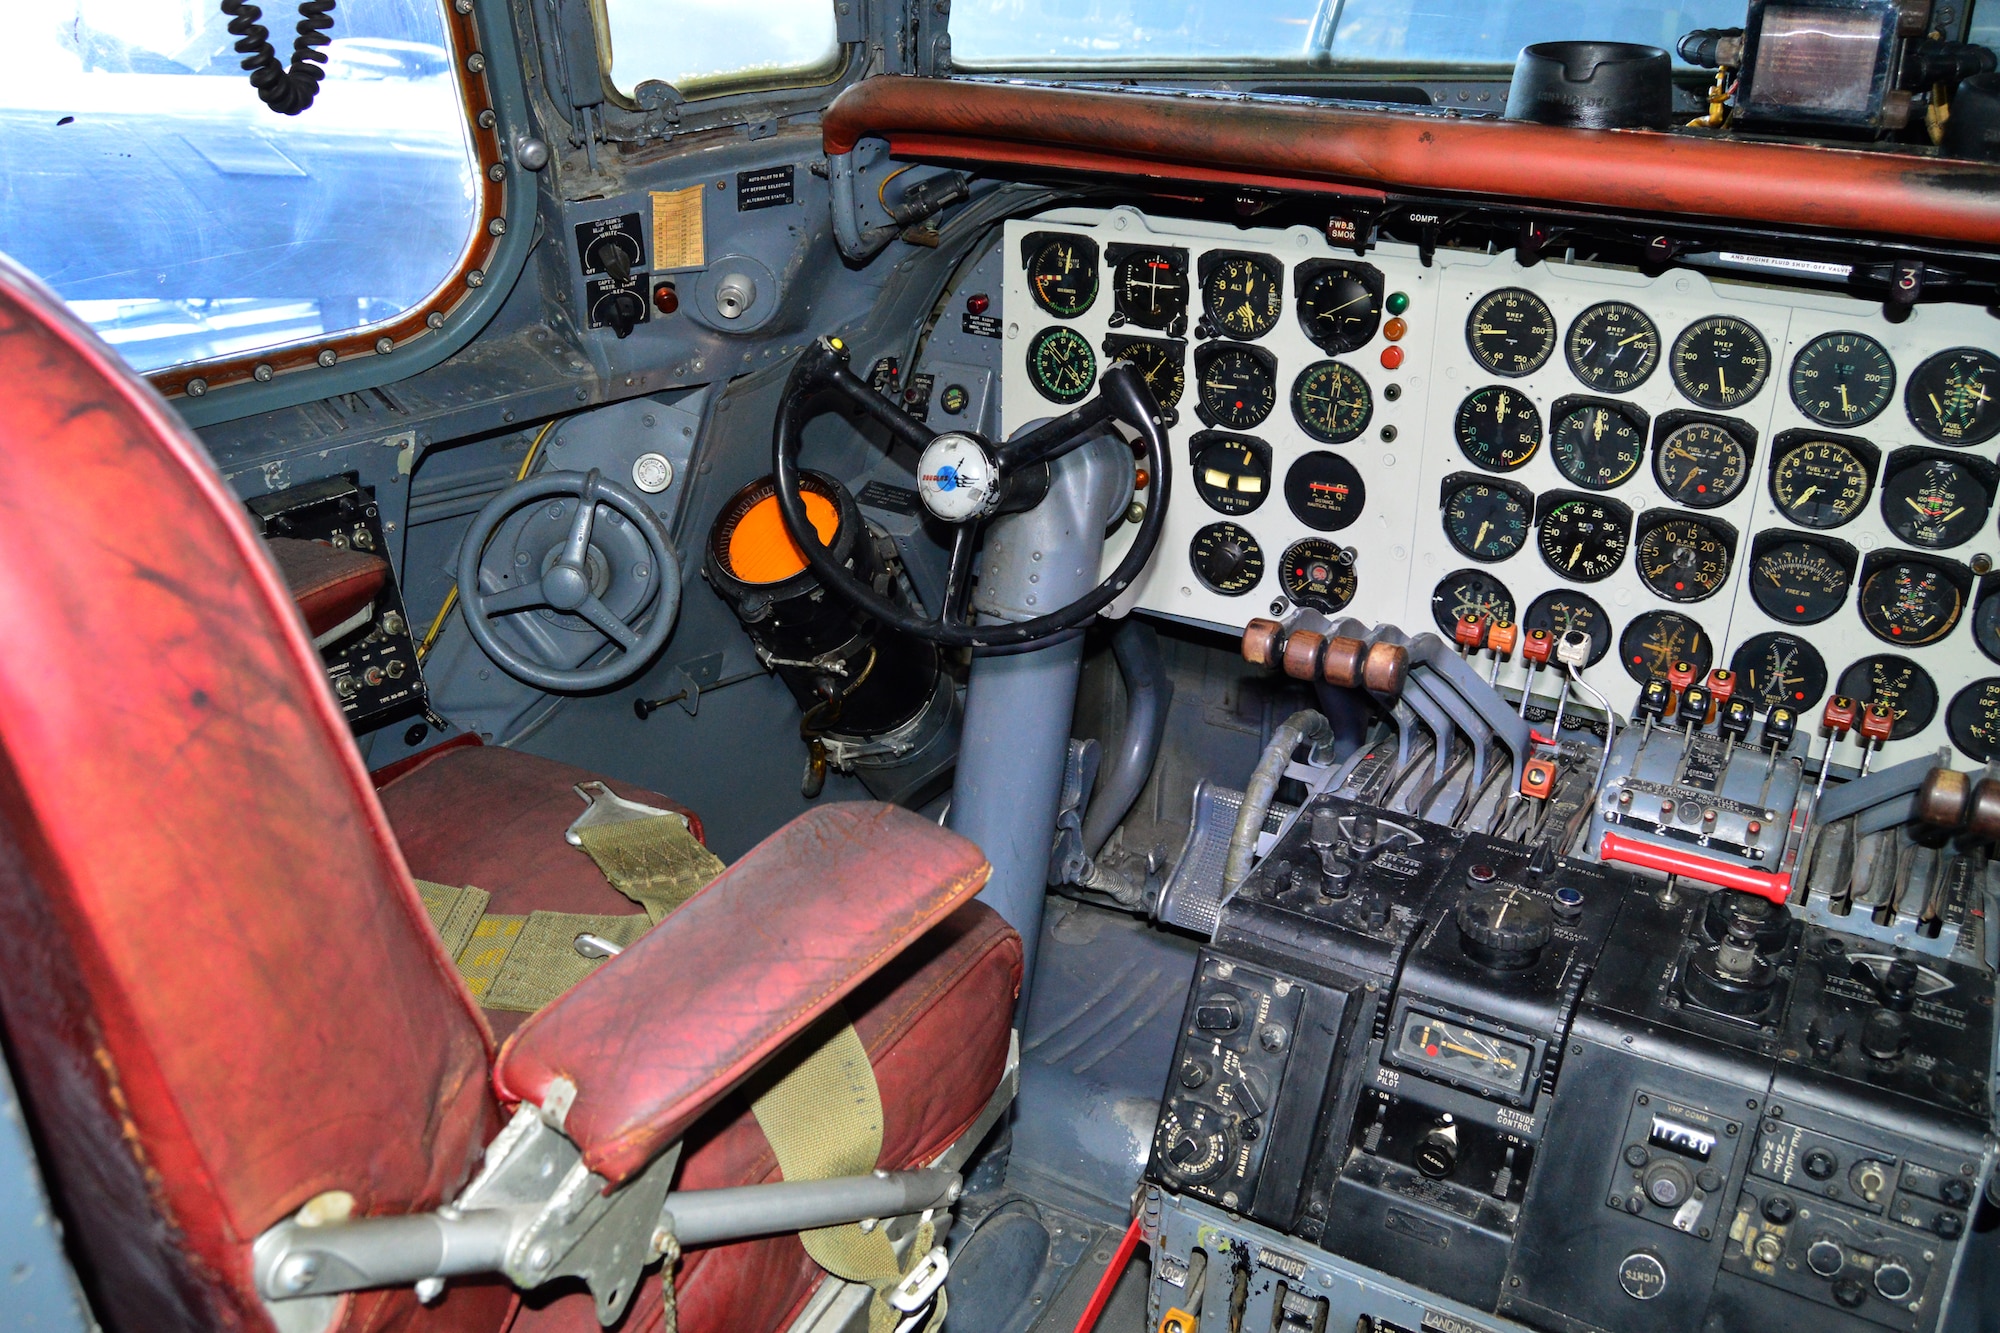 DAYTON, Ohio -- Douglas VC-118 "Independence" cockpit in the Presidential Gallery at the National Museum of the United States Air Force. (U.S. Air Force photo by Ken LaRock) 